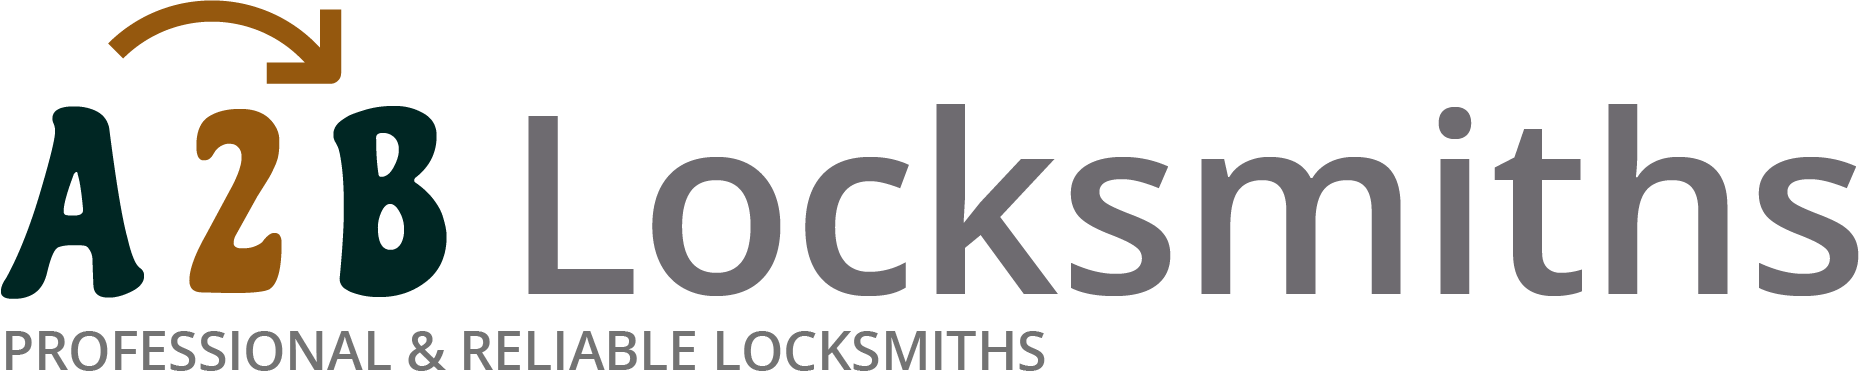 If you are locked out of house in Welwyn Garden City, our 24/7 local emergency locksmith services can help you.